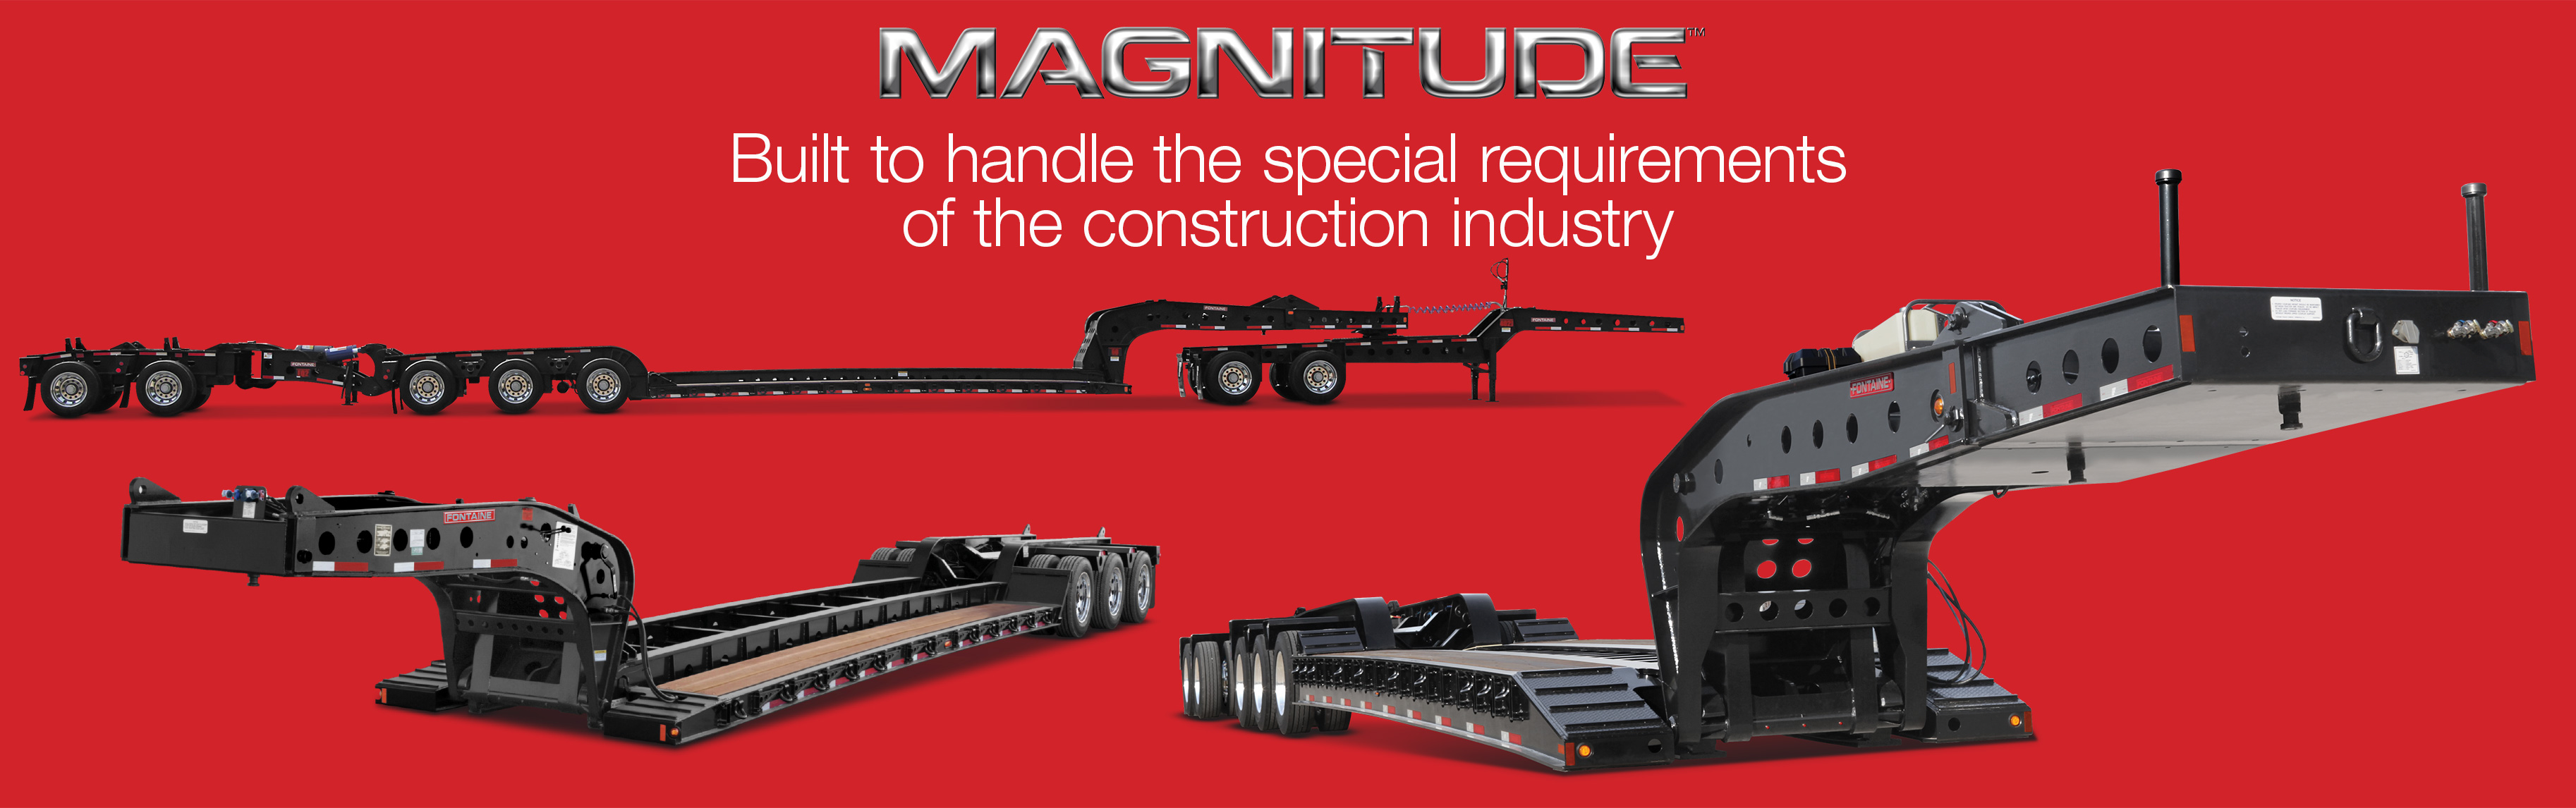 Fontaine Heavy Haul Magnitude Lowboy Trailers for construction industy